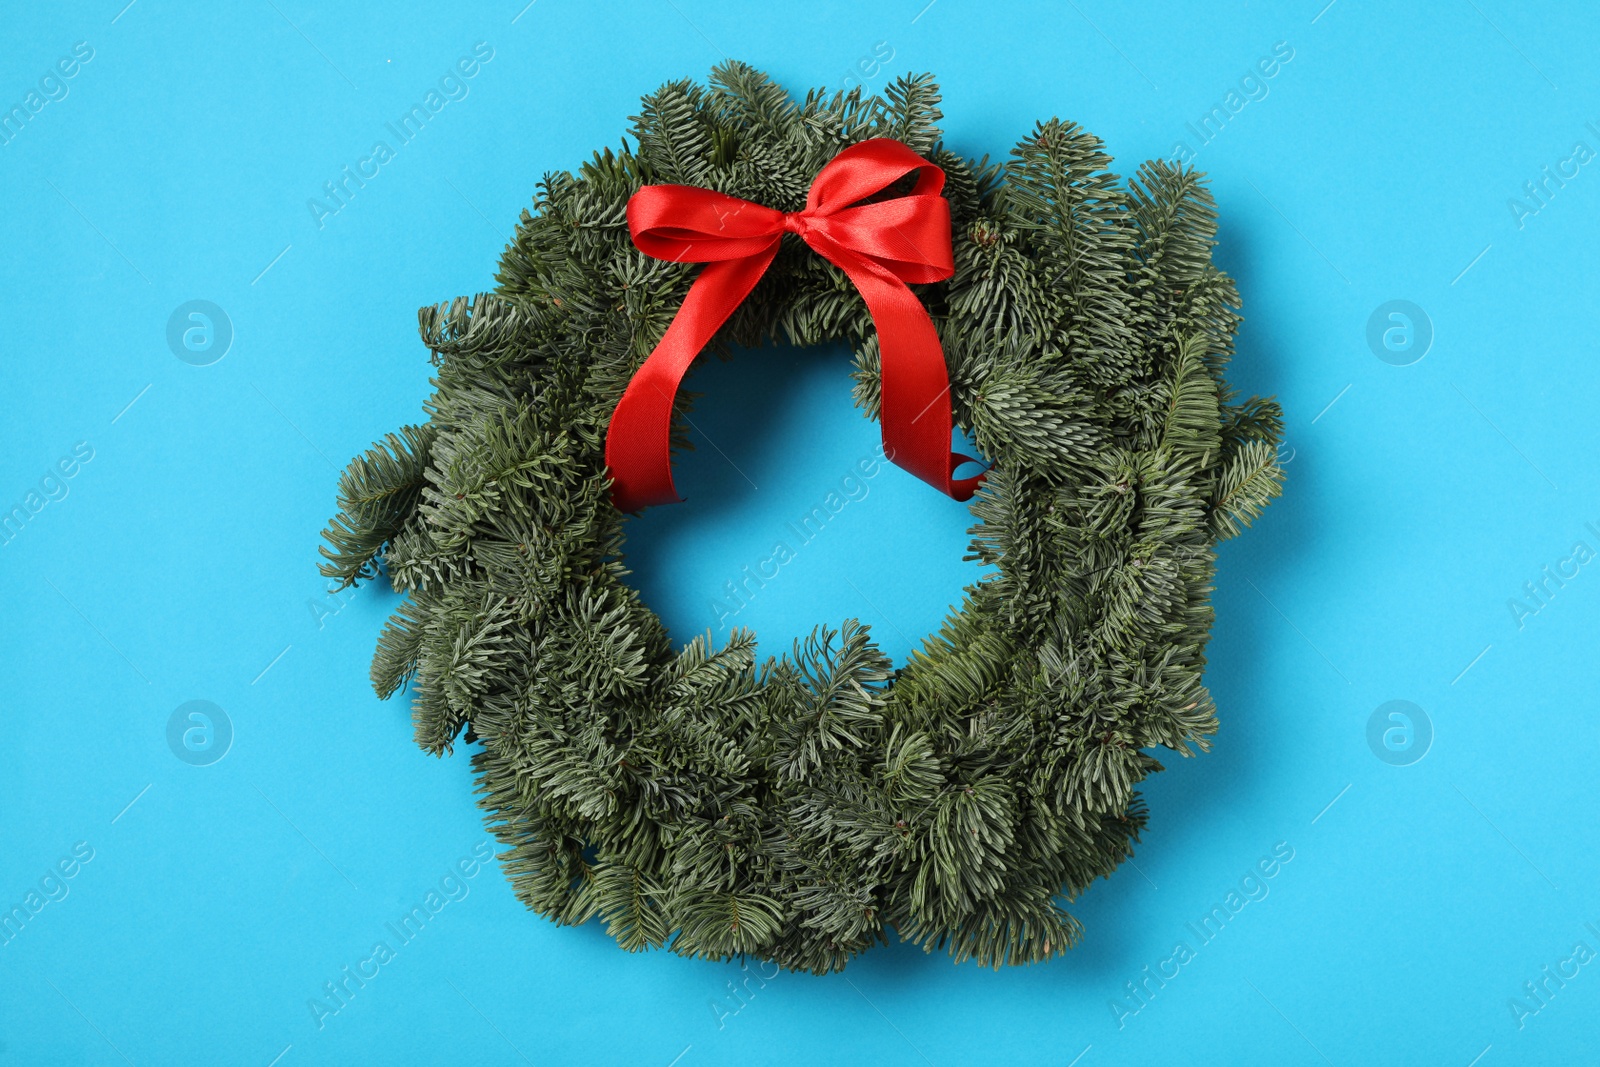 Photo of Christmas wreath made of fir tree branches with red ribbon on light blue background